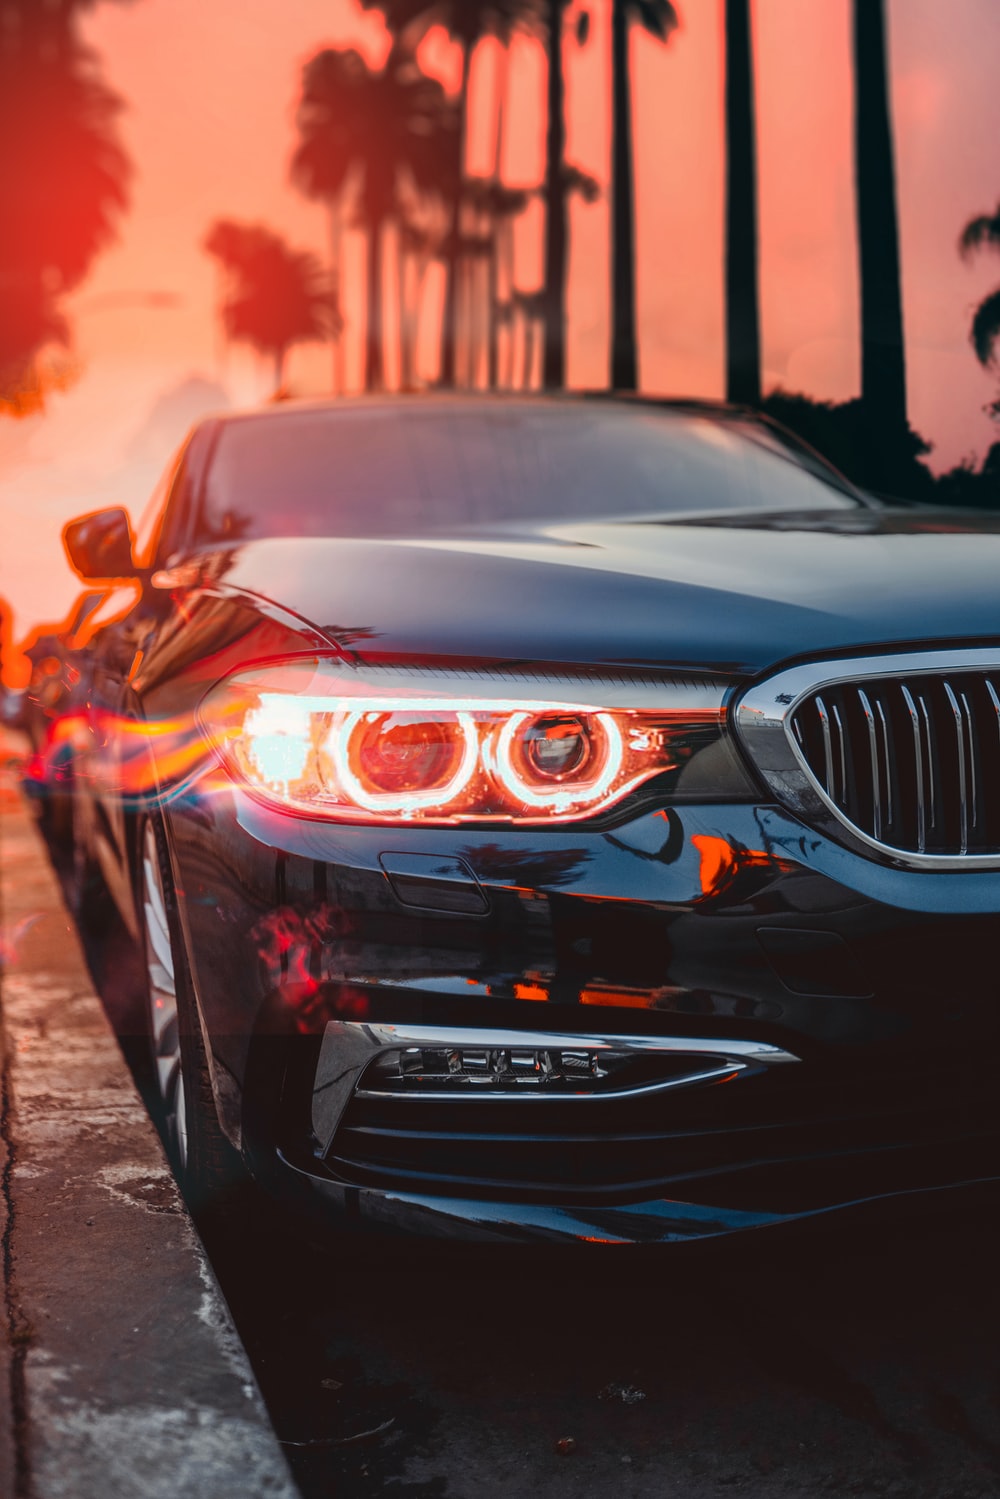 Bmw Car Picture. Download Free Image